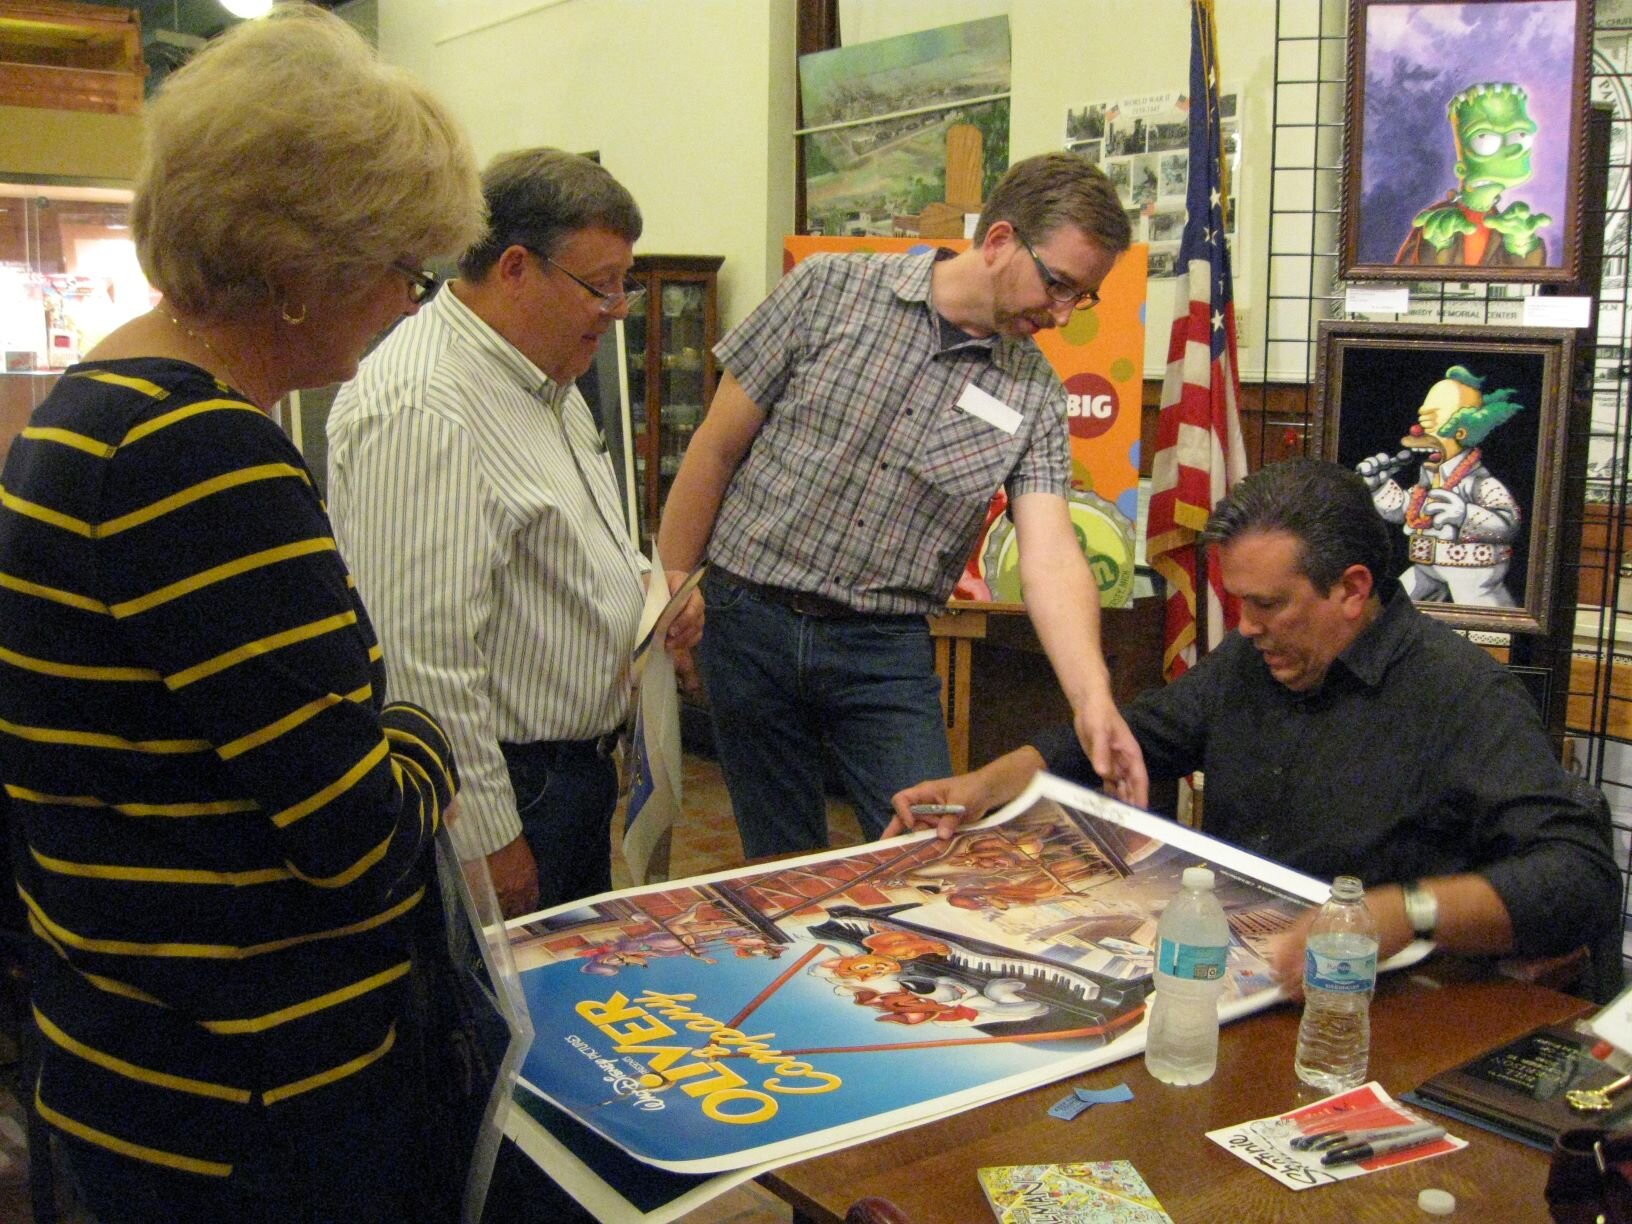 Bill Morrison, seated at right, greets guests and signs posters at the opening night reception